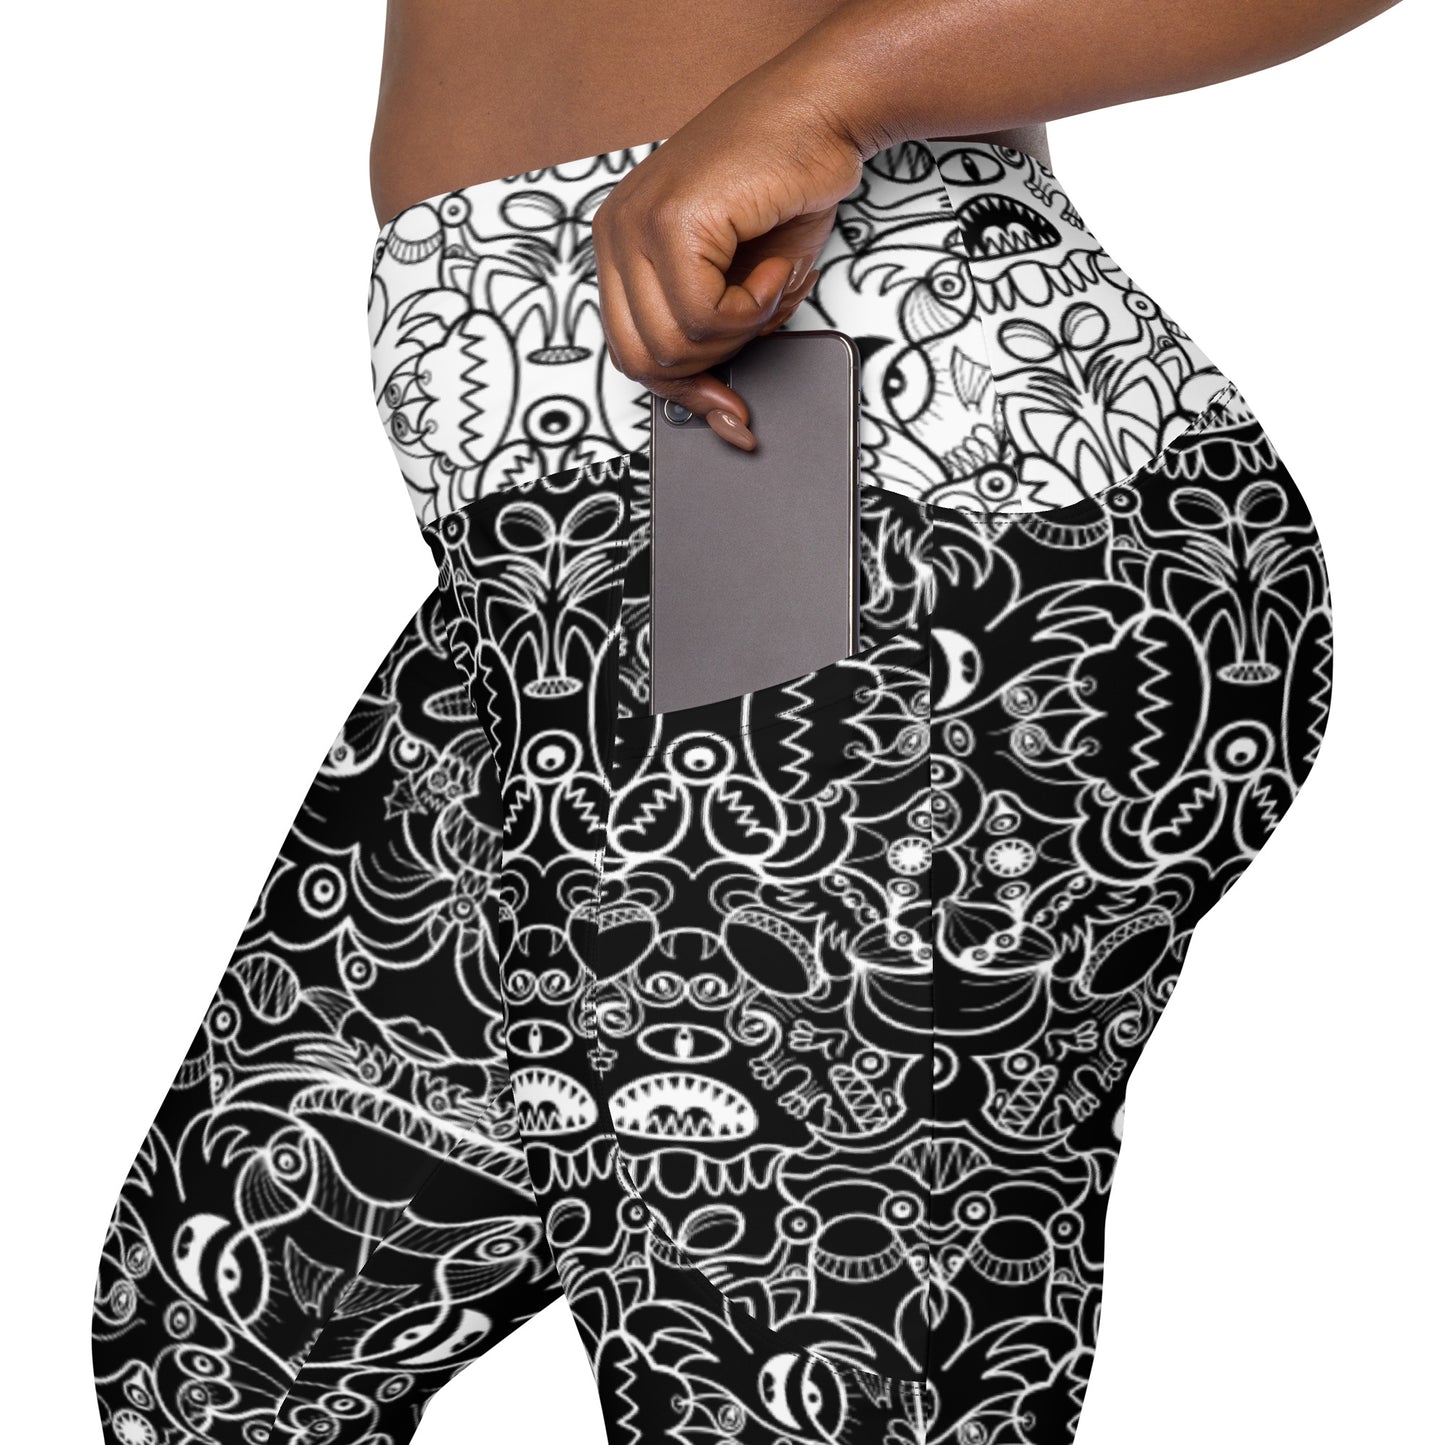 The powerful dark side of the Doodle world Crossover leggings with pockets. Pocket detail